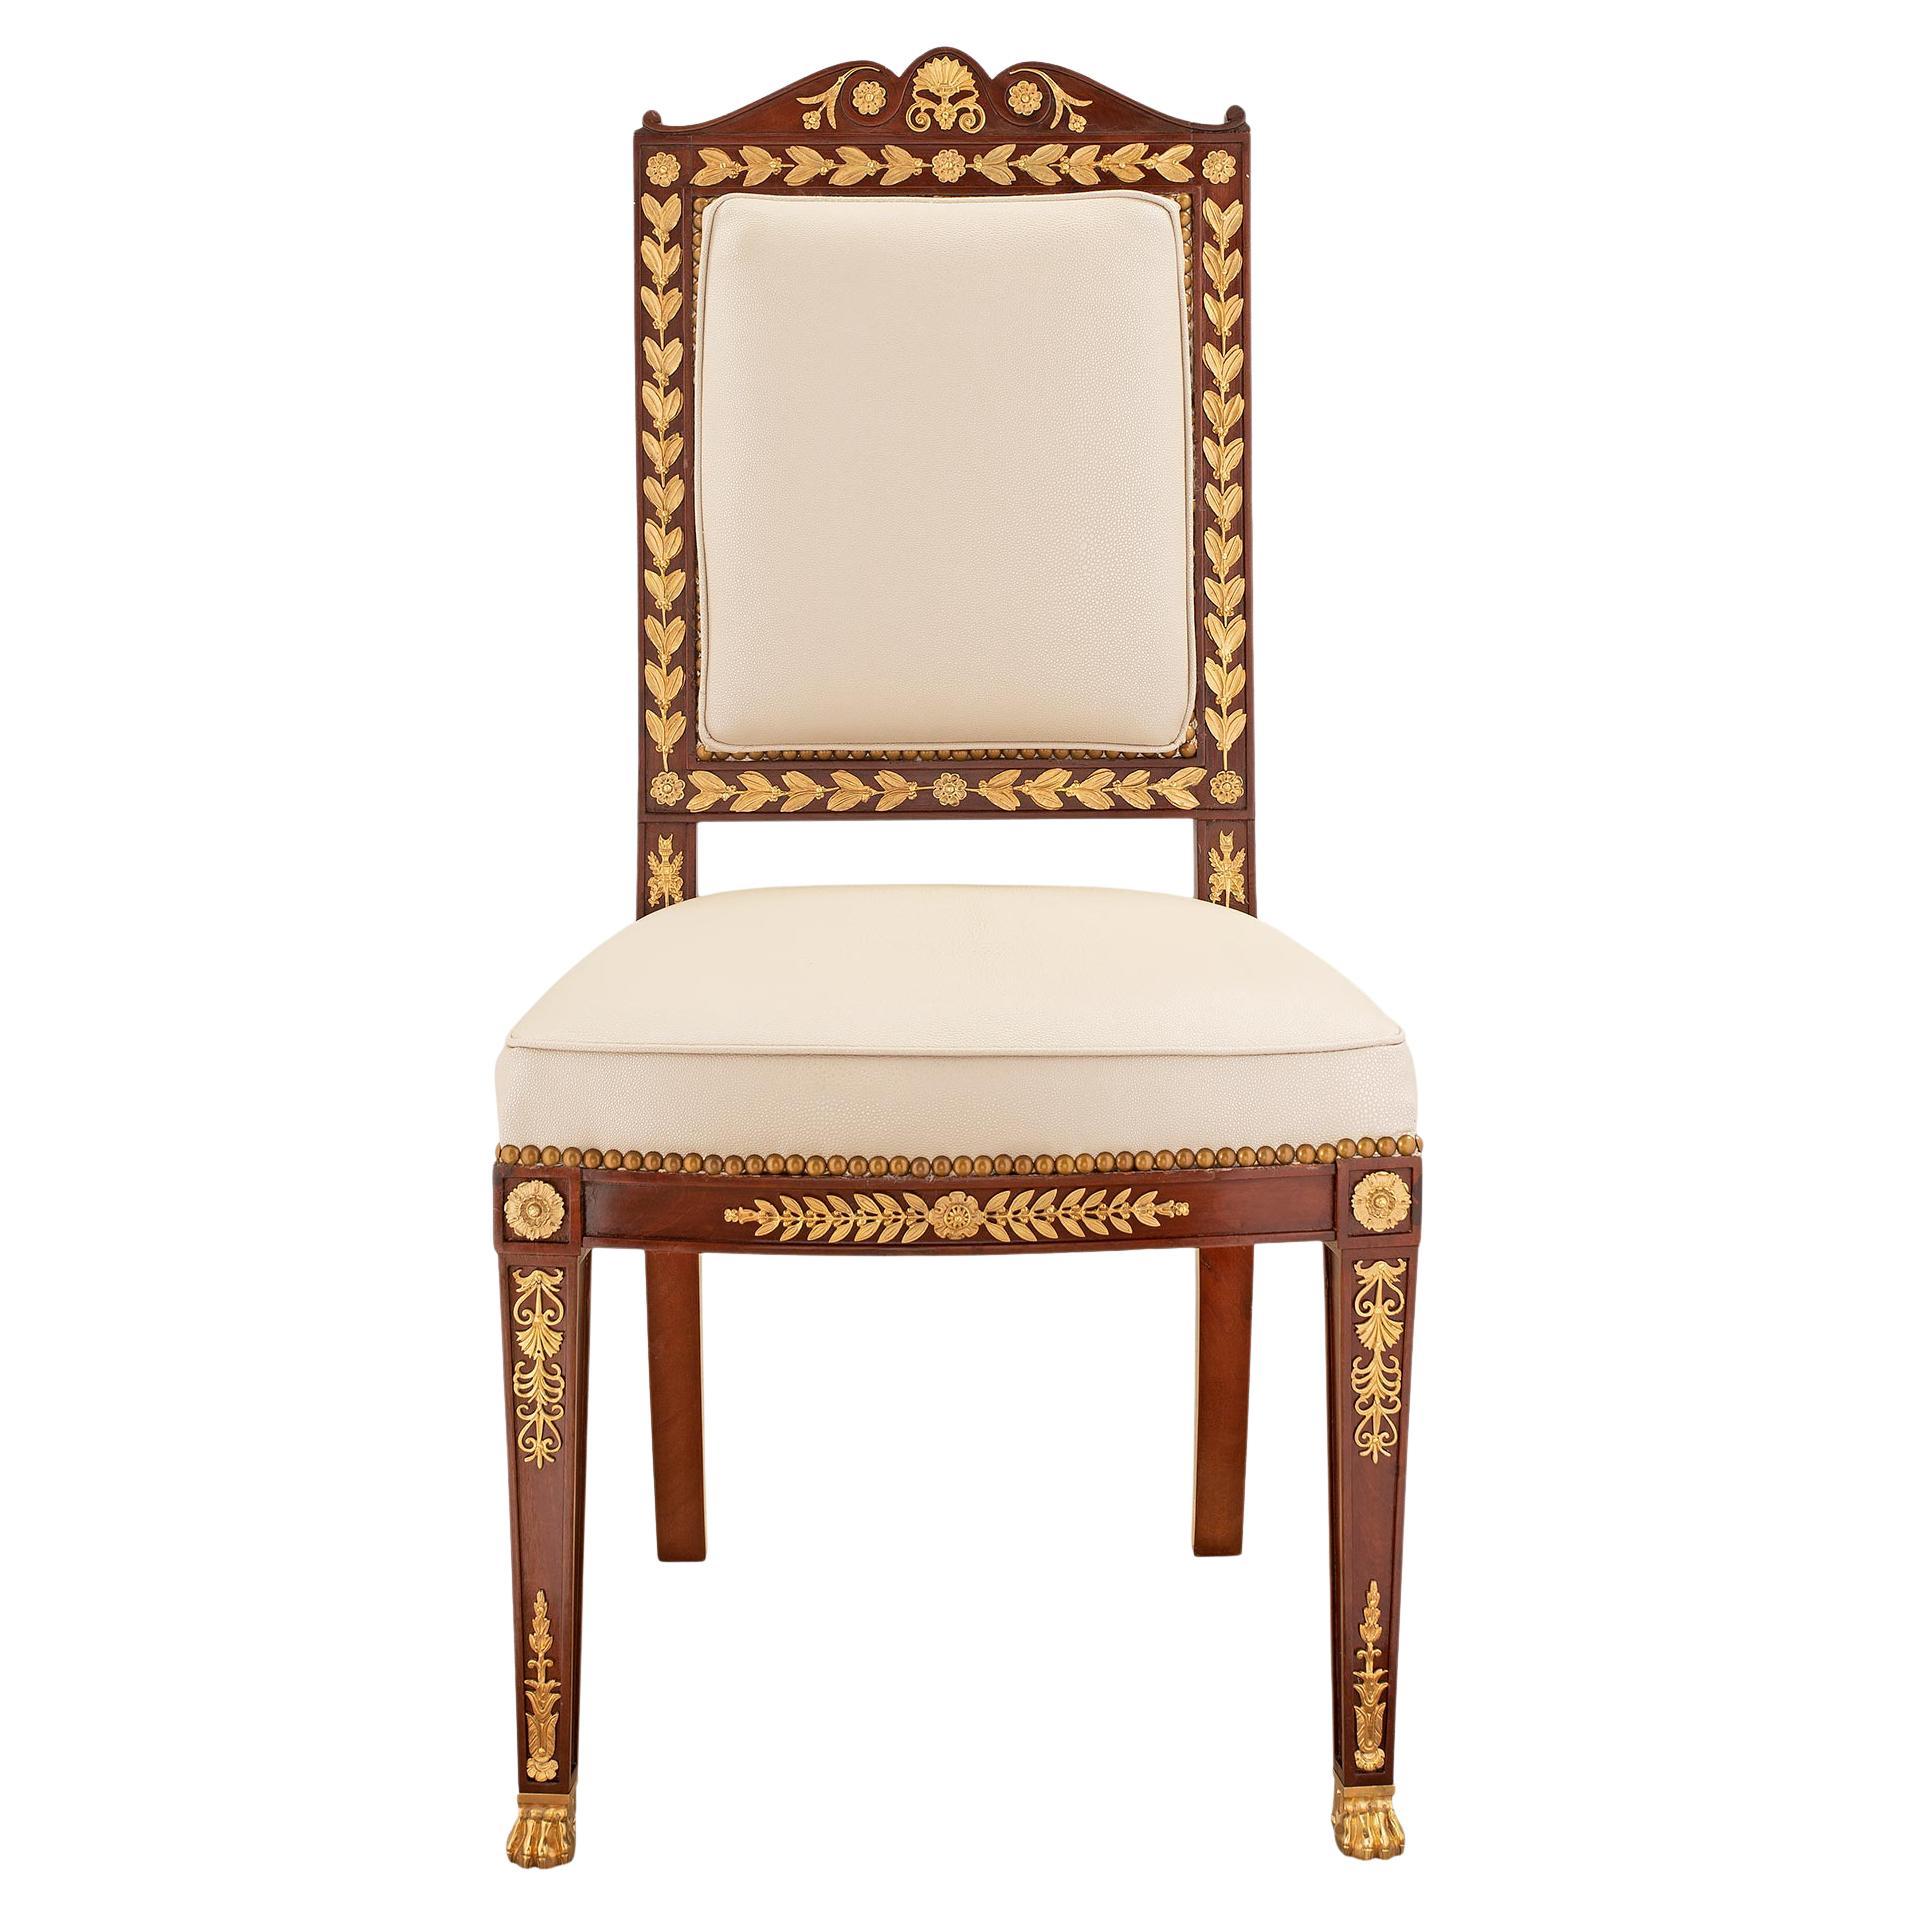 French 19th Century Empire Style Ormolu and Solid Mahogany Side Chair